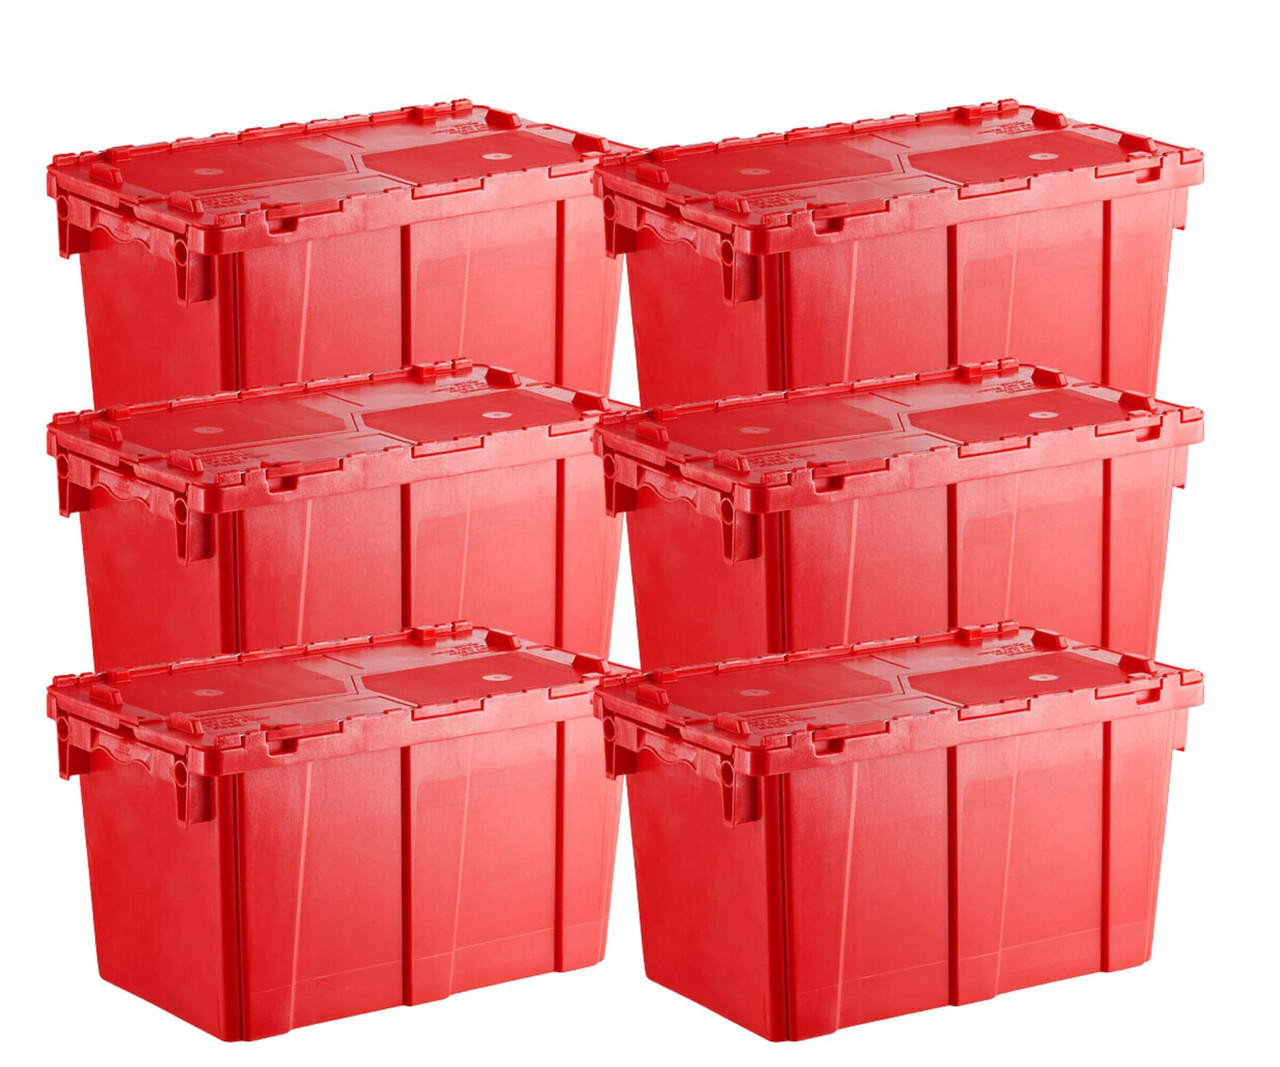  Orbis 22" x 13" x 13" Stack-N-Nest Flipak Red Industrial Tote Box with Hinged Lockable Lid (6-Pack) - Secure and Versatile Storage Solution for Industrial Use 